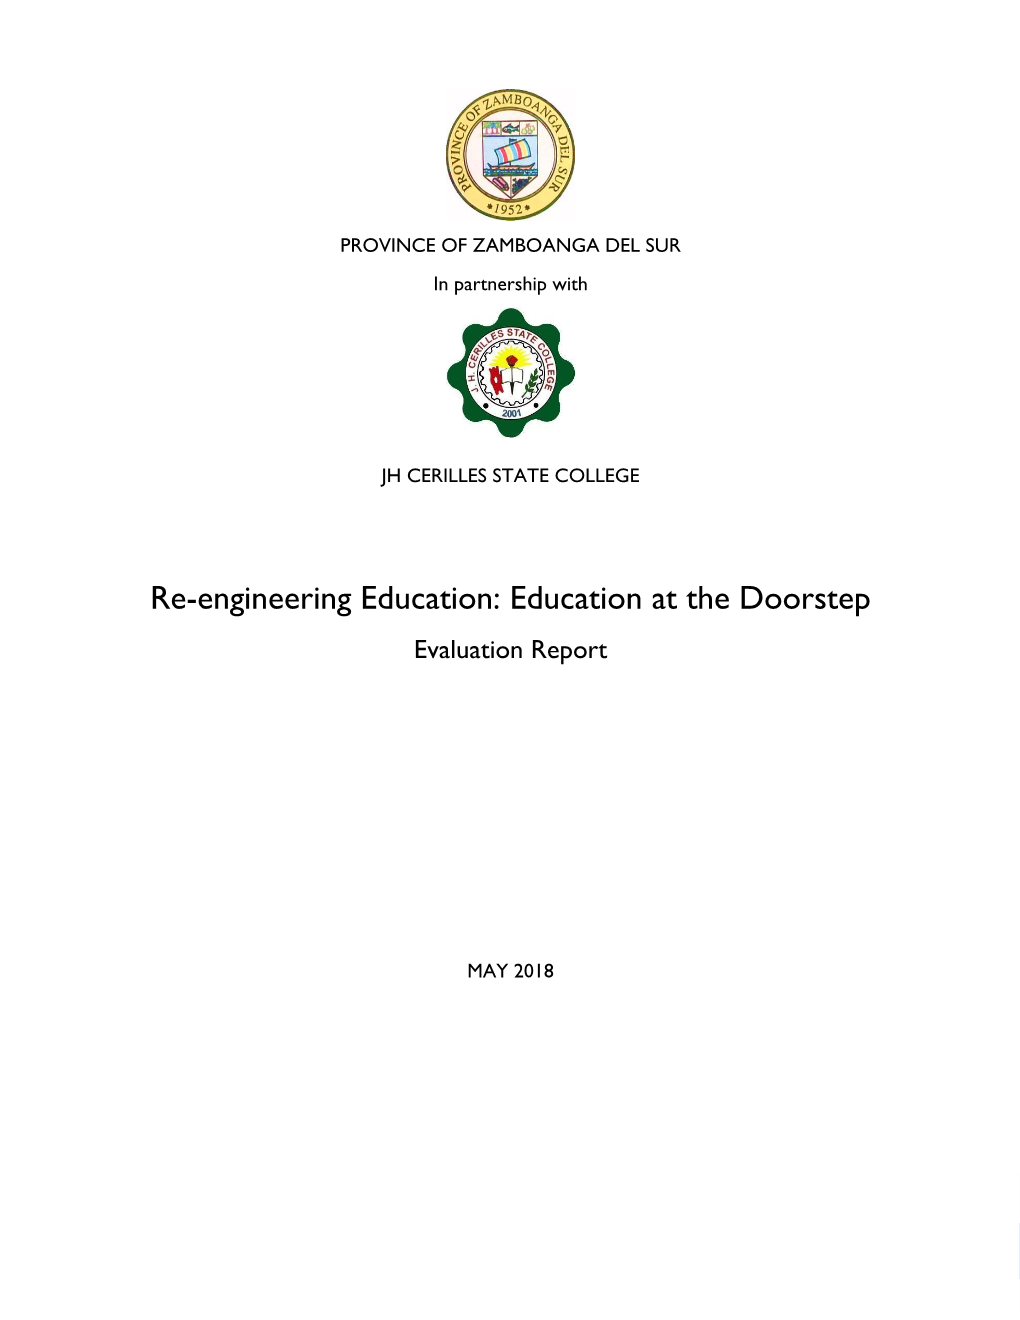 Re-Engineering Education: Education at the Doorstep Evaluation Report